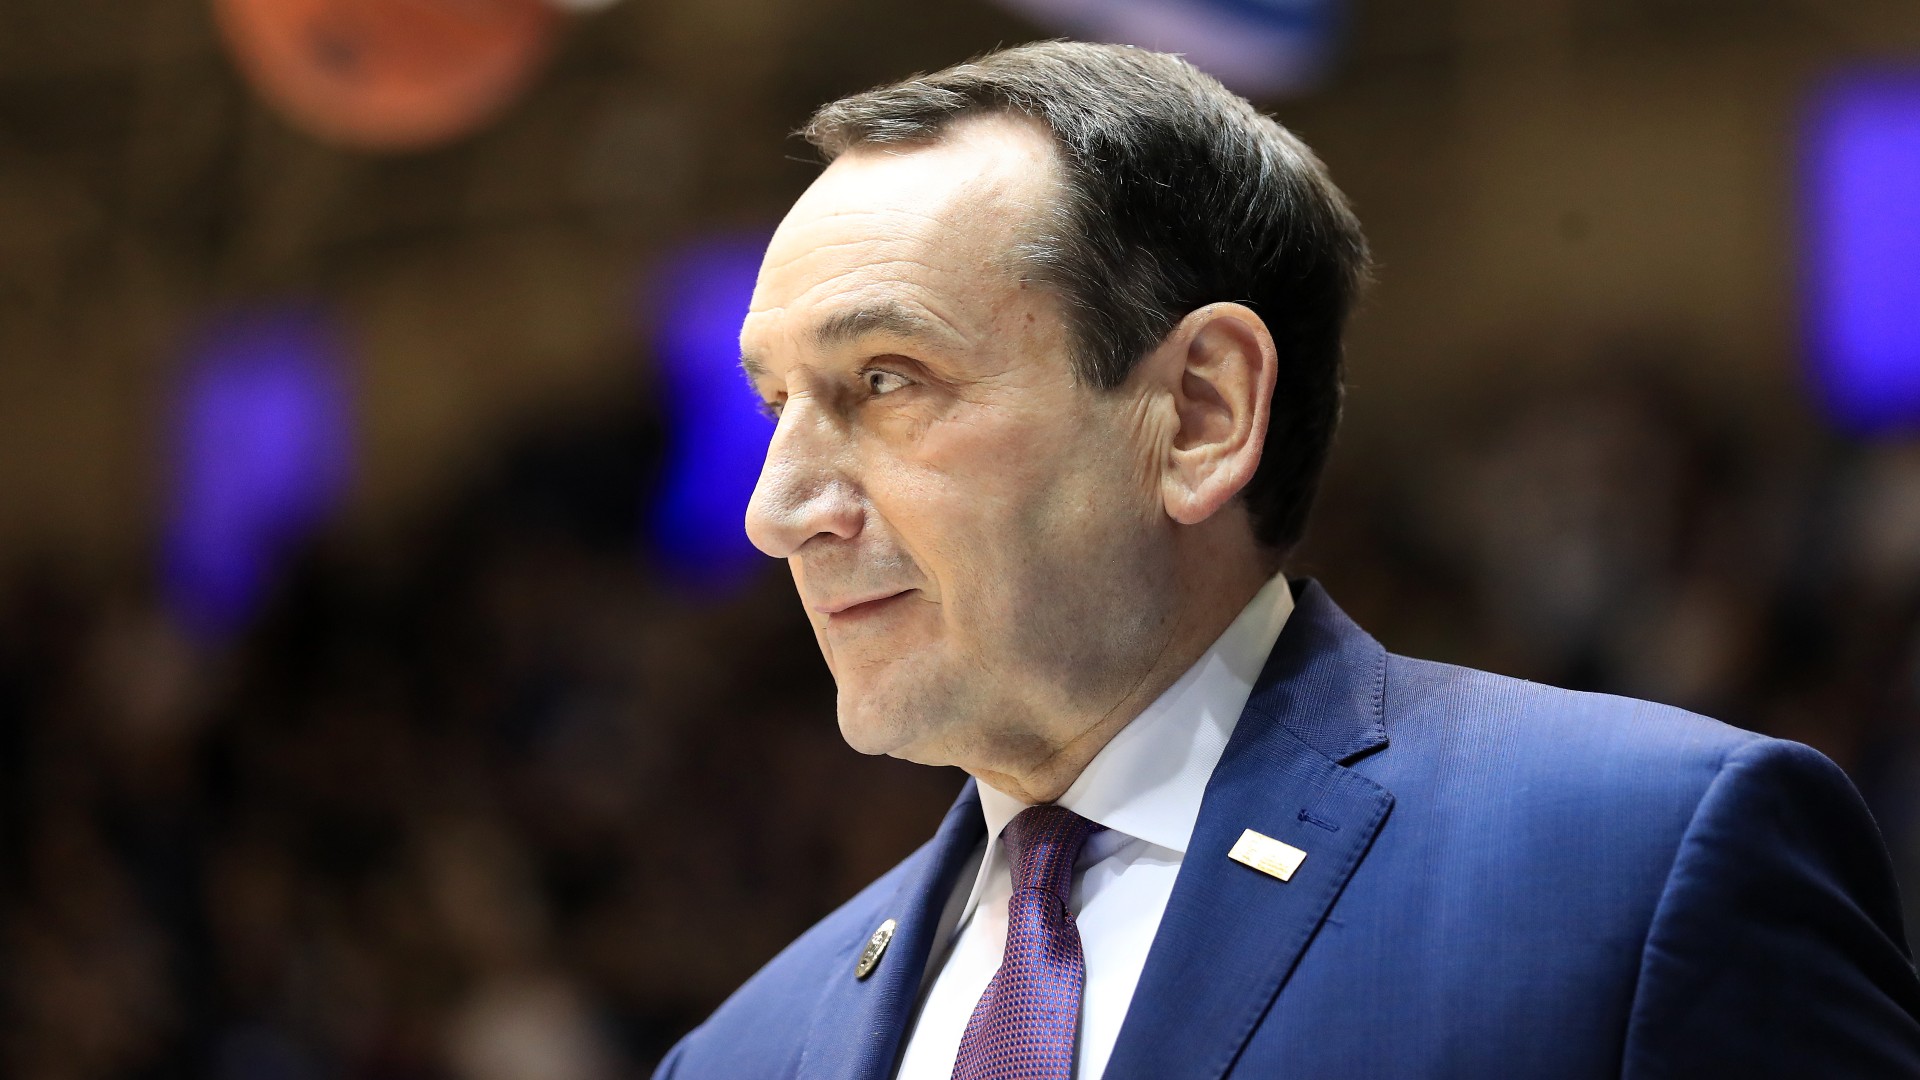 College Basketball Betting: How Has Duke’s Mike Krzyzewski Performed Historically ATS? article feature image